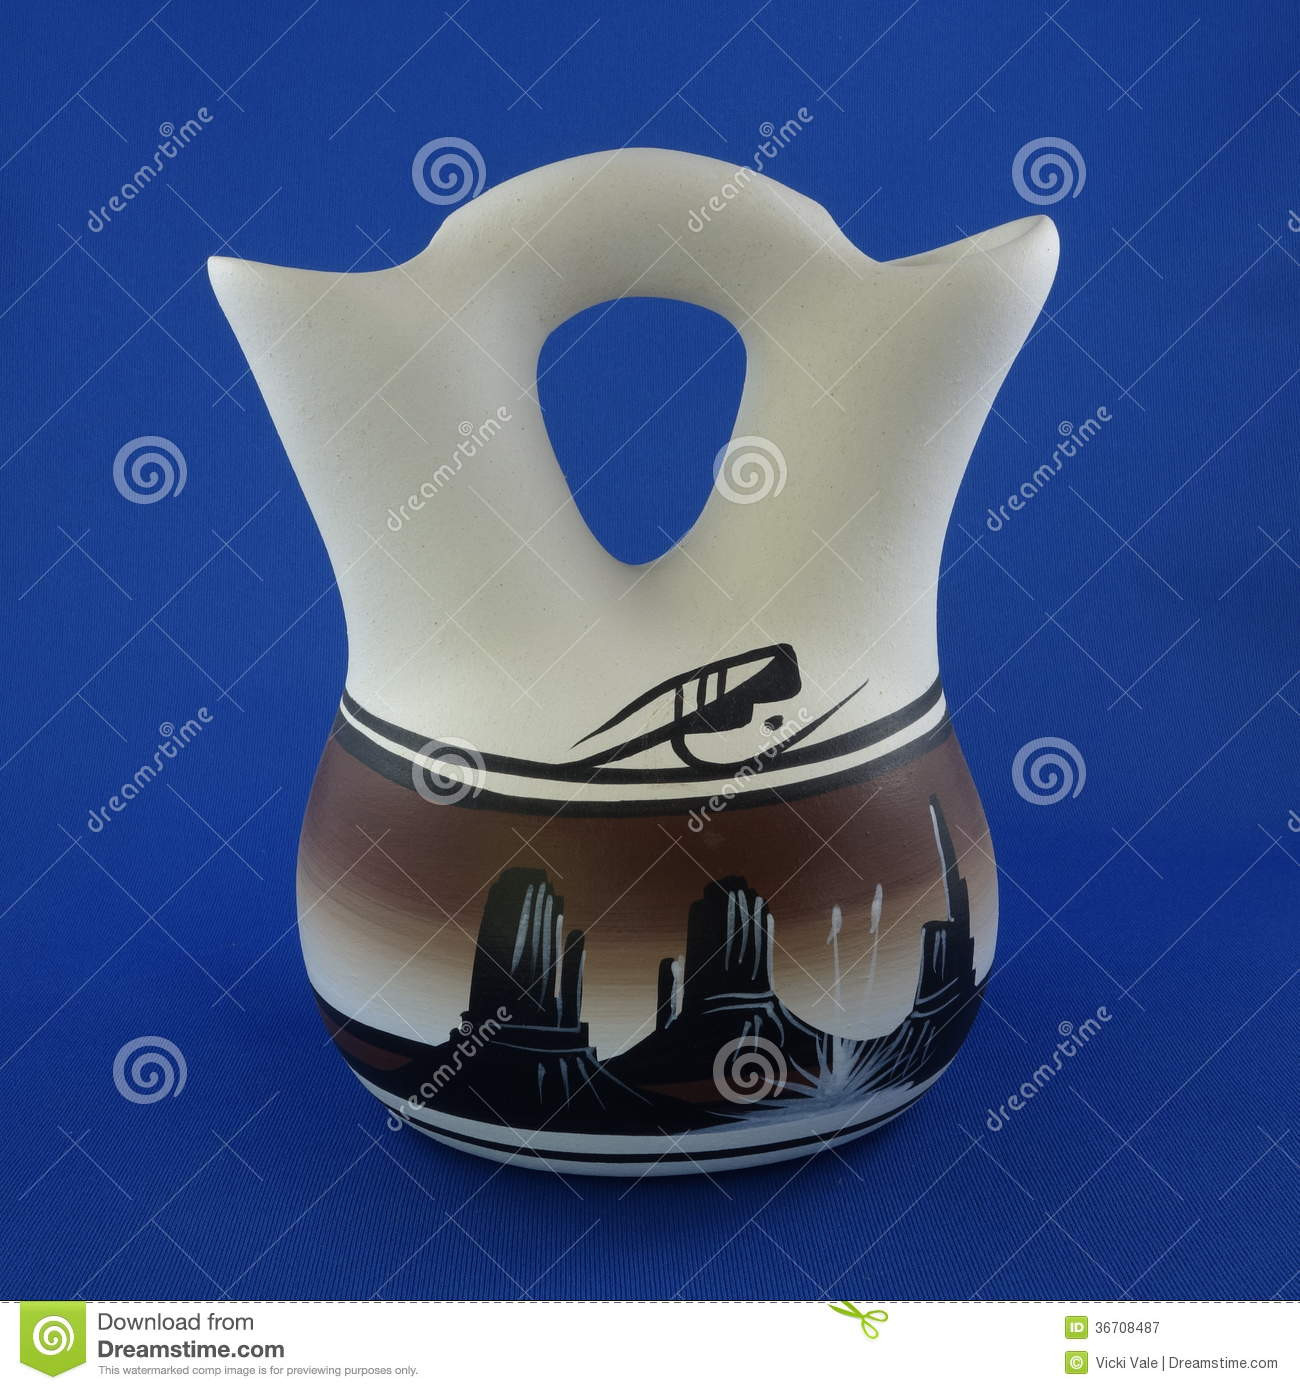 12 Recommended Cherokee Wedding Vase for Sale 2024 free download cherokee wedding vase for sale of navajo indian wedding vase stock image image of crafted 36708487 pertaining to navajo indian wedding vase